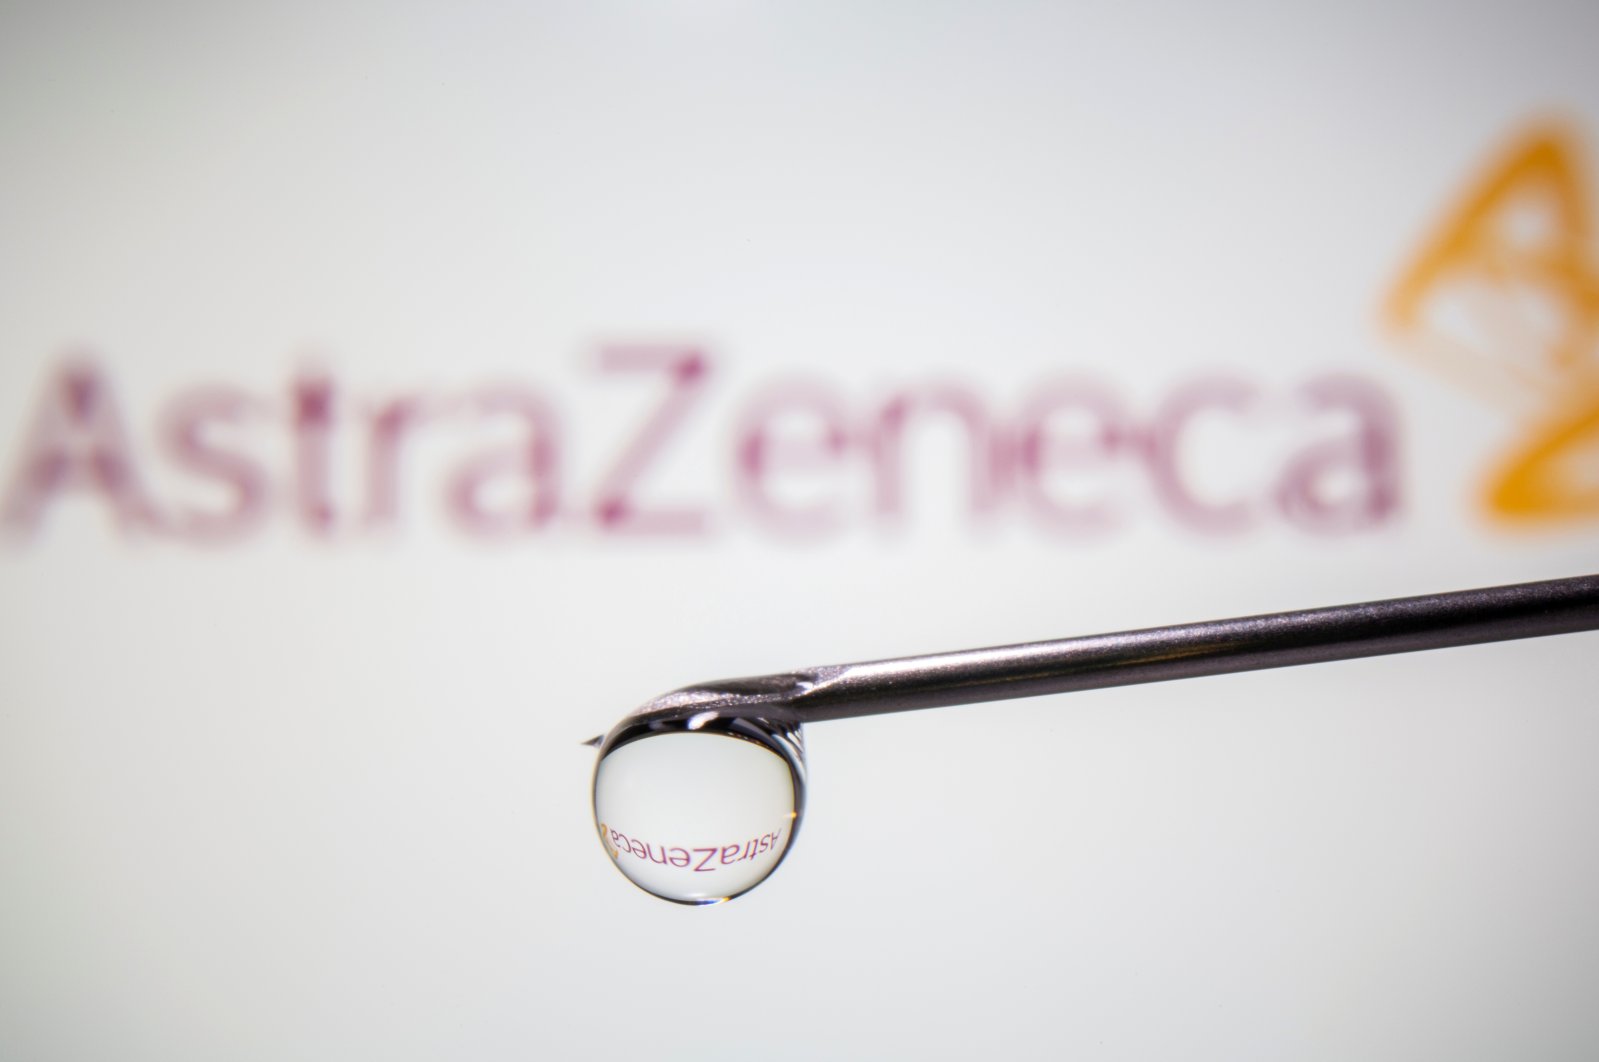 AstraZeneca's logo is reflected in a drop on a syringe needle in this illustration taken Nov. 9, 2020. (Reuters Photo)